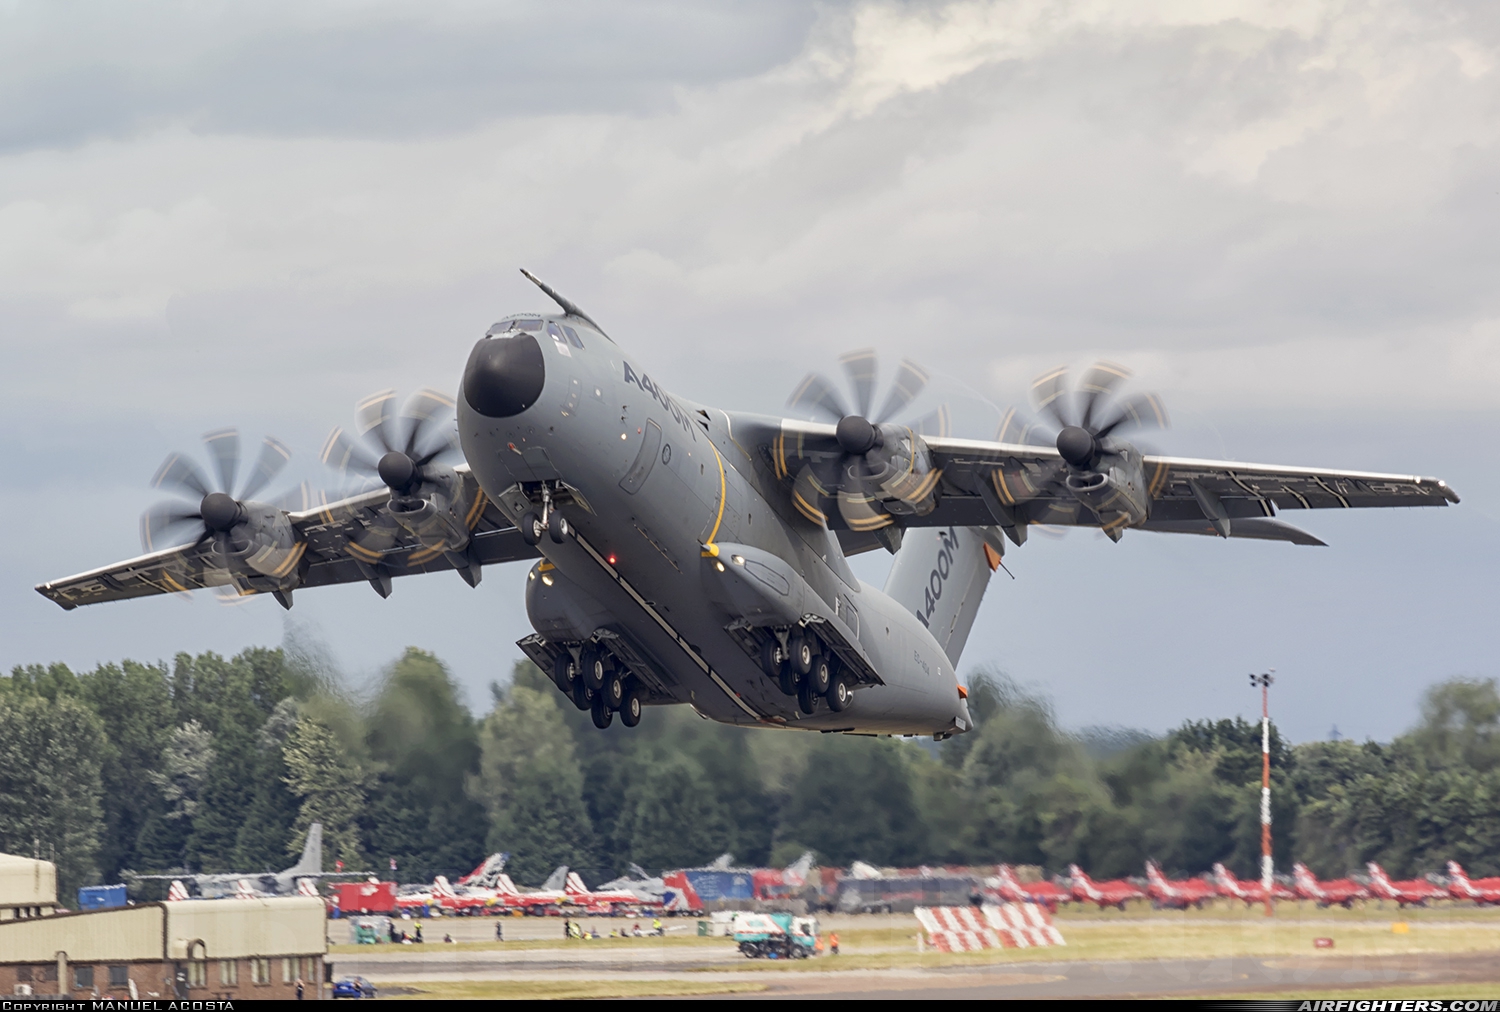 Company Owned - Airbus Airbus A400M Grizzly EC-404 at Fairford (FFD / EGVA), UK